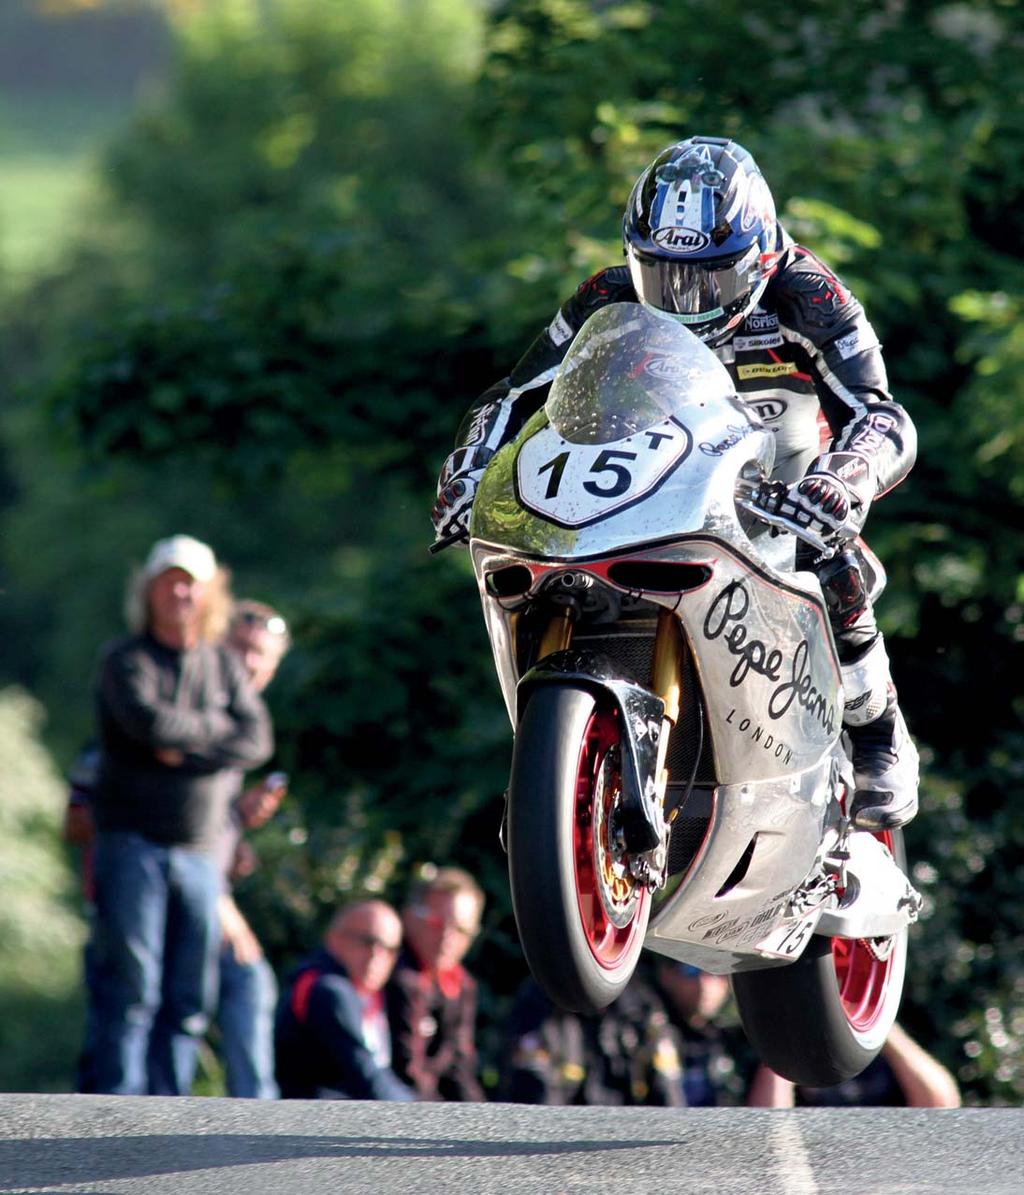 Norton Racing TT SUCCESS Our fire-breathing Norton SG5 TT race bike achieved an incredible 131mph average speed lap at the Isle of Man TT with factory rider David Johnson on-board and a seventh place